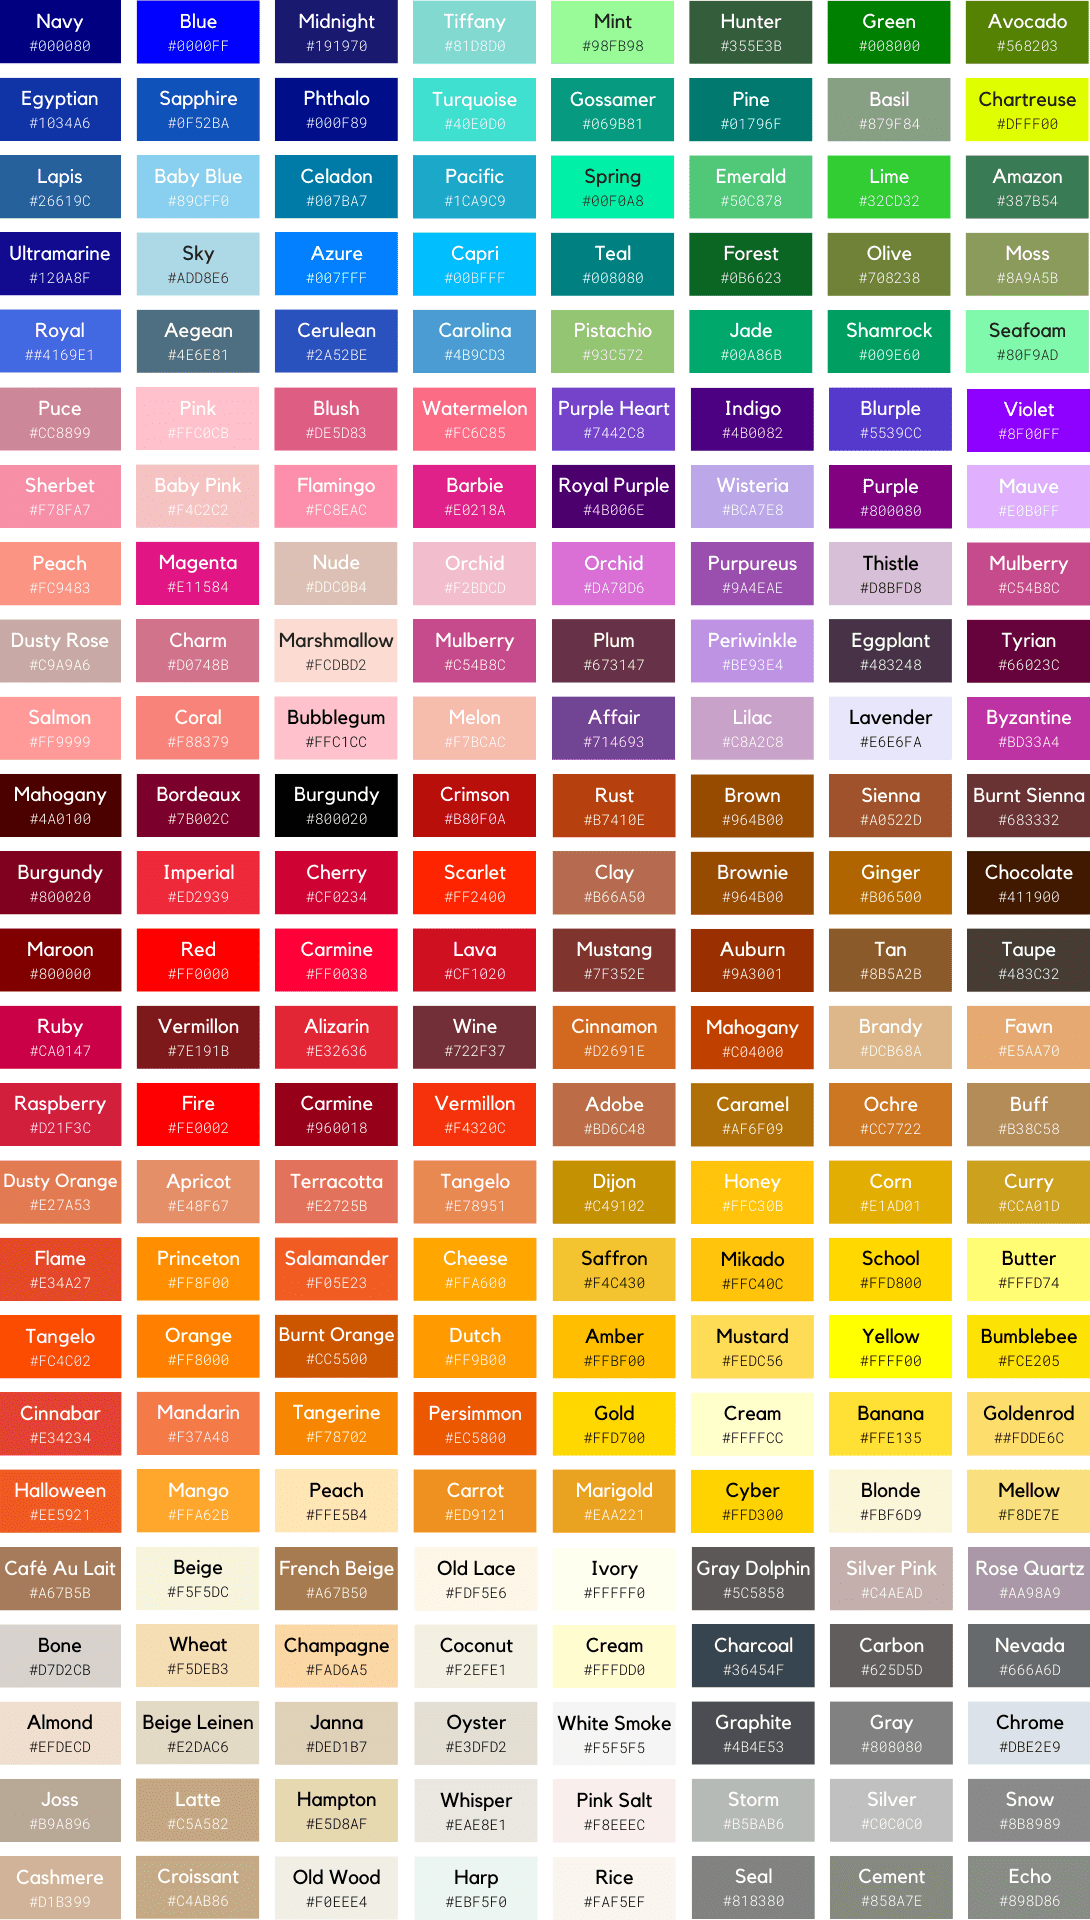 Color Palette Popular Colors Color Chart Patterns And Names Rgb Hex Html  Vector Color Stock Illustration - Download Image Now - iStock